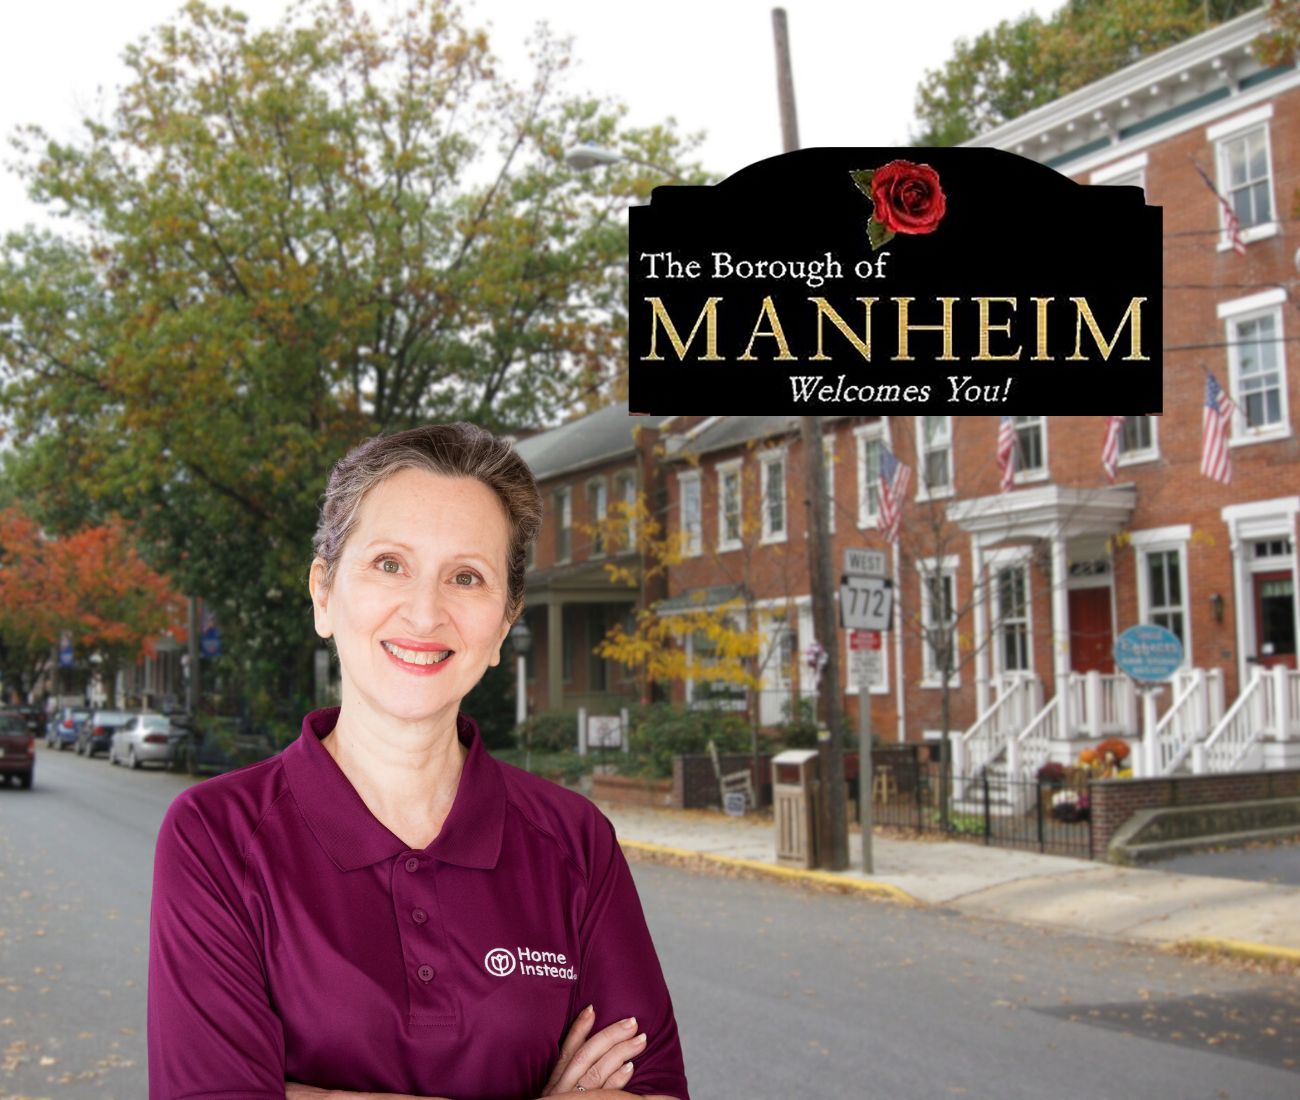 Home Instead caregiver with Manheim, Pennsylvania in the background